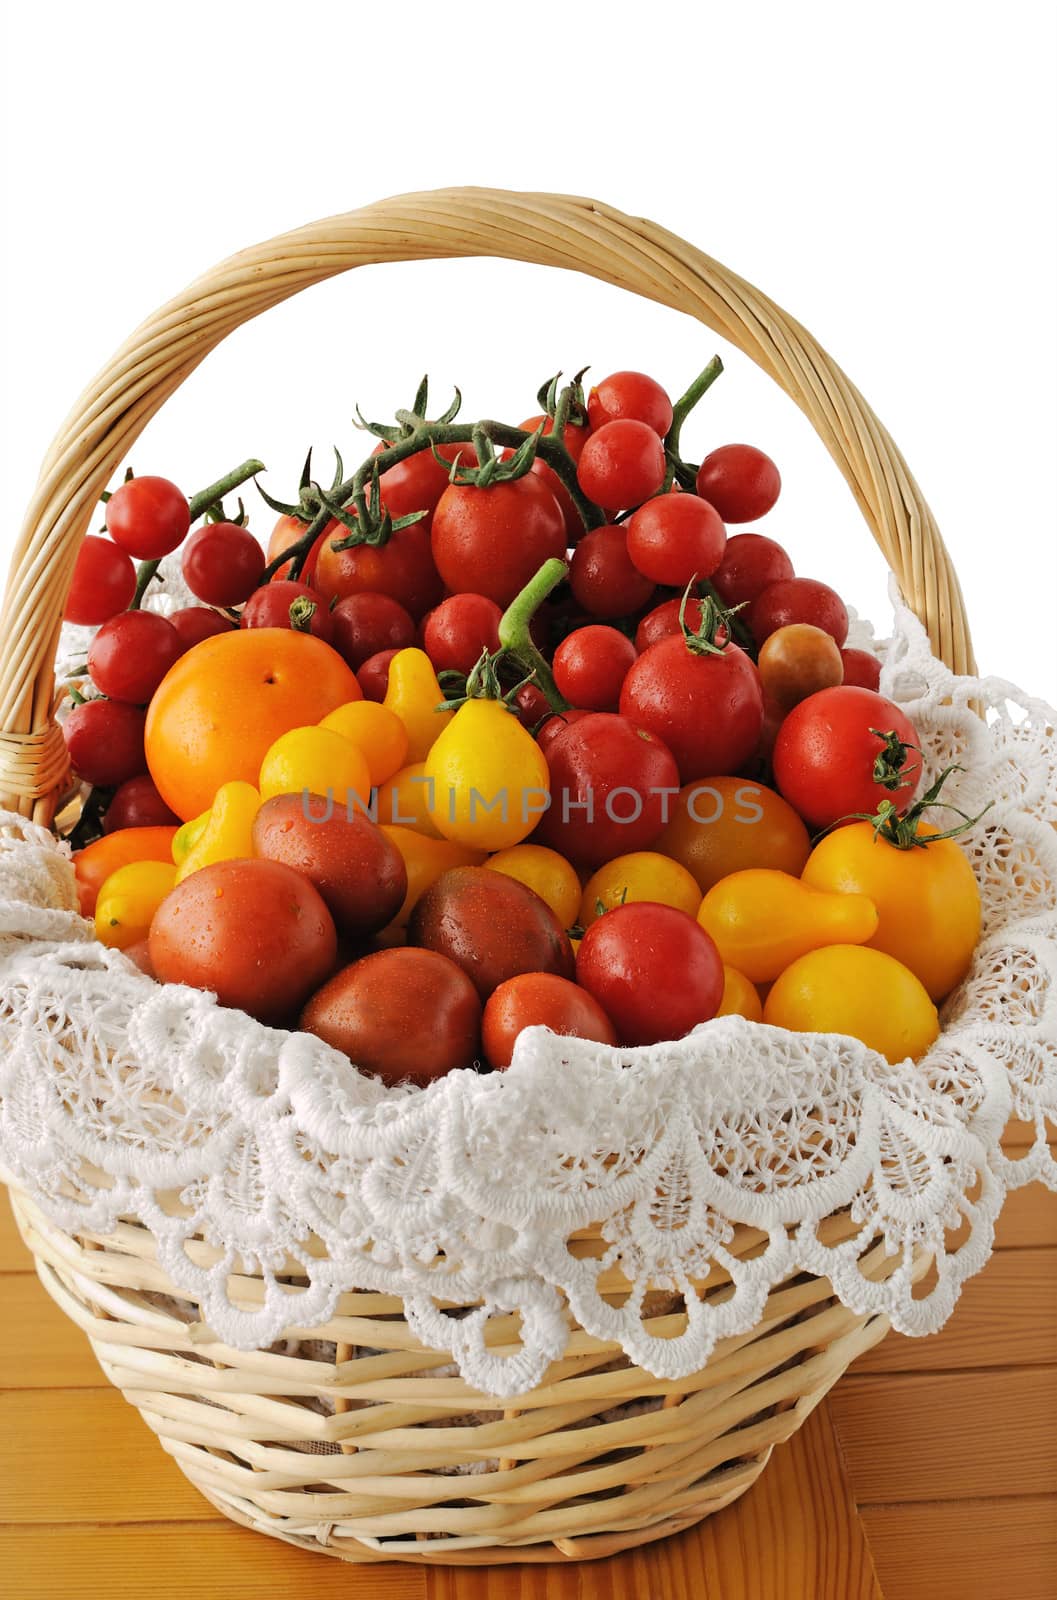 Different varieties of tomatoes in a basket on a wooden table